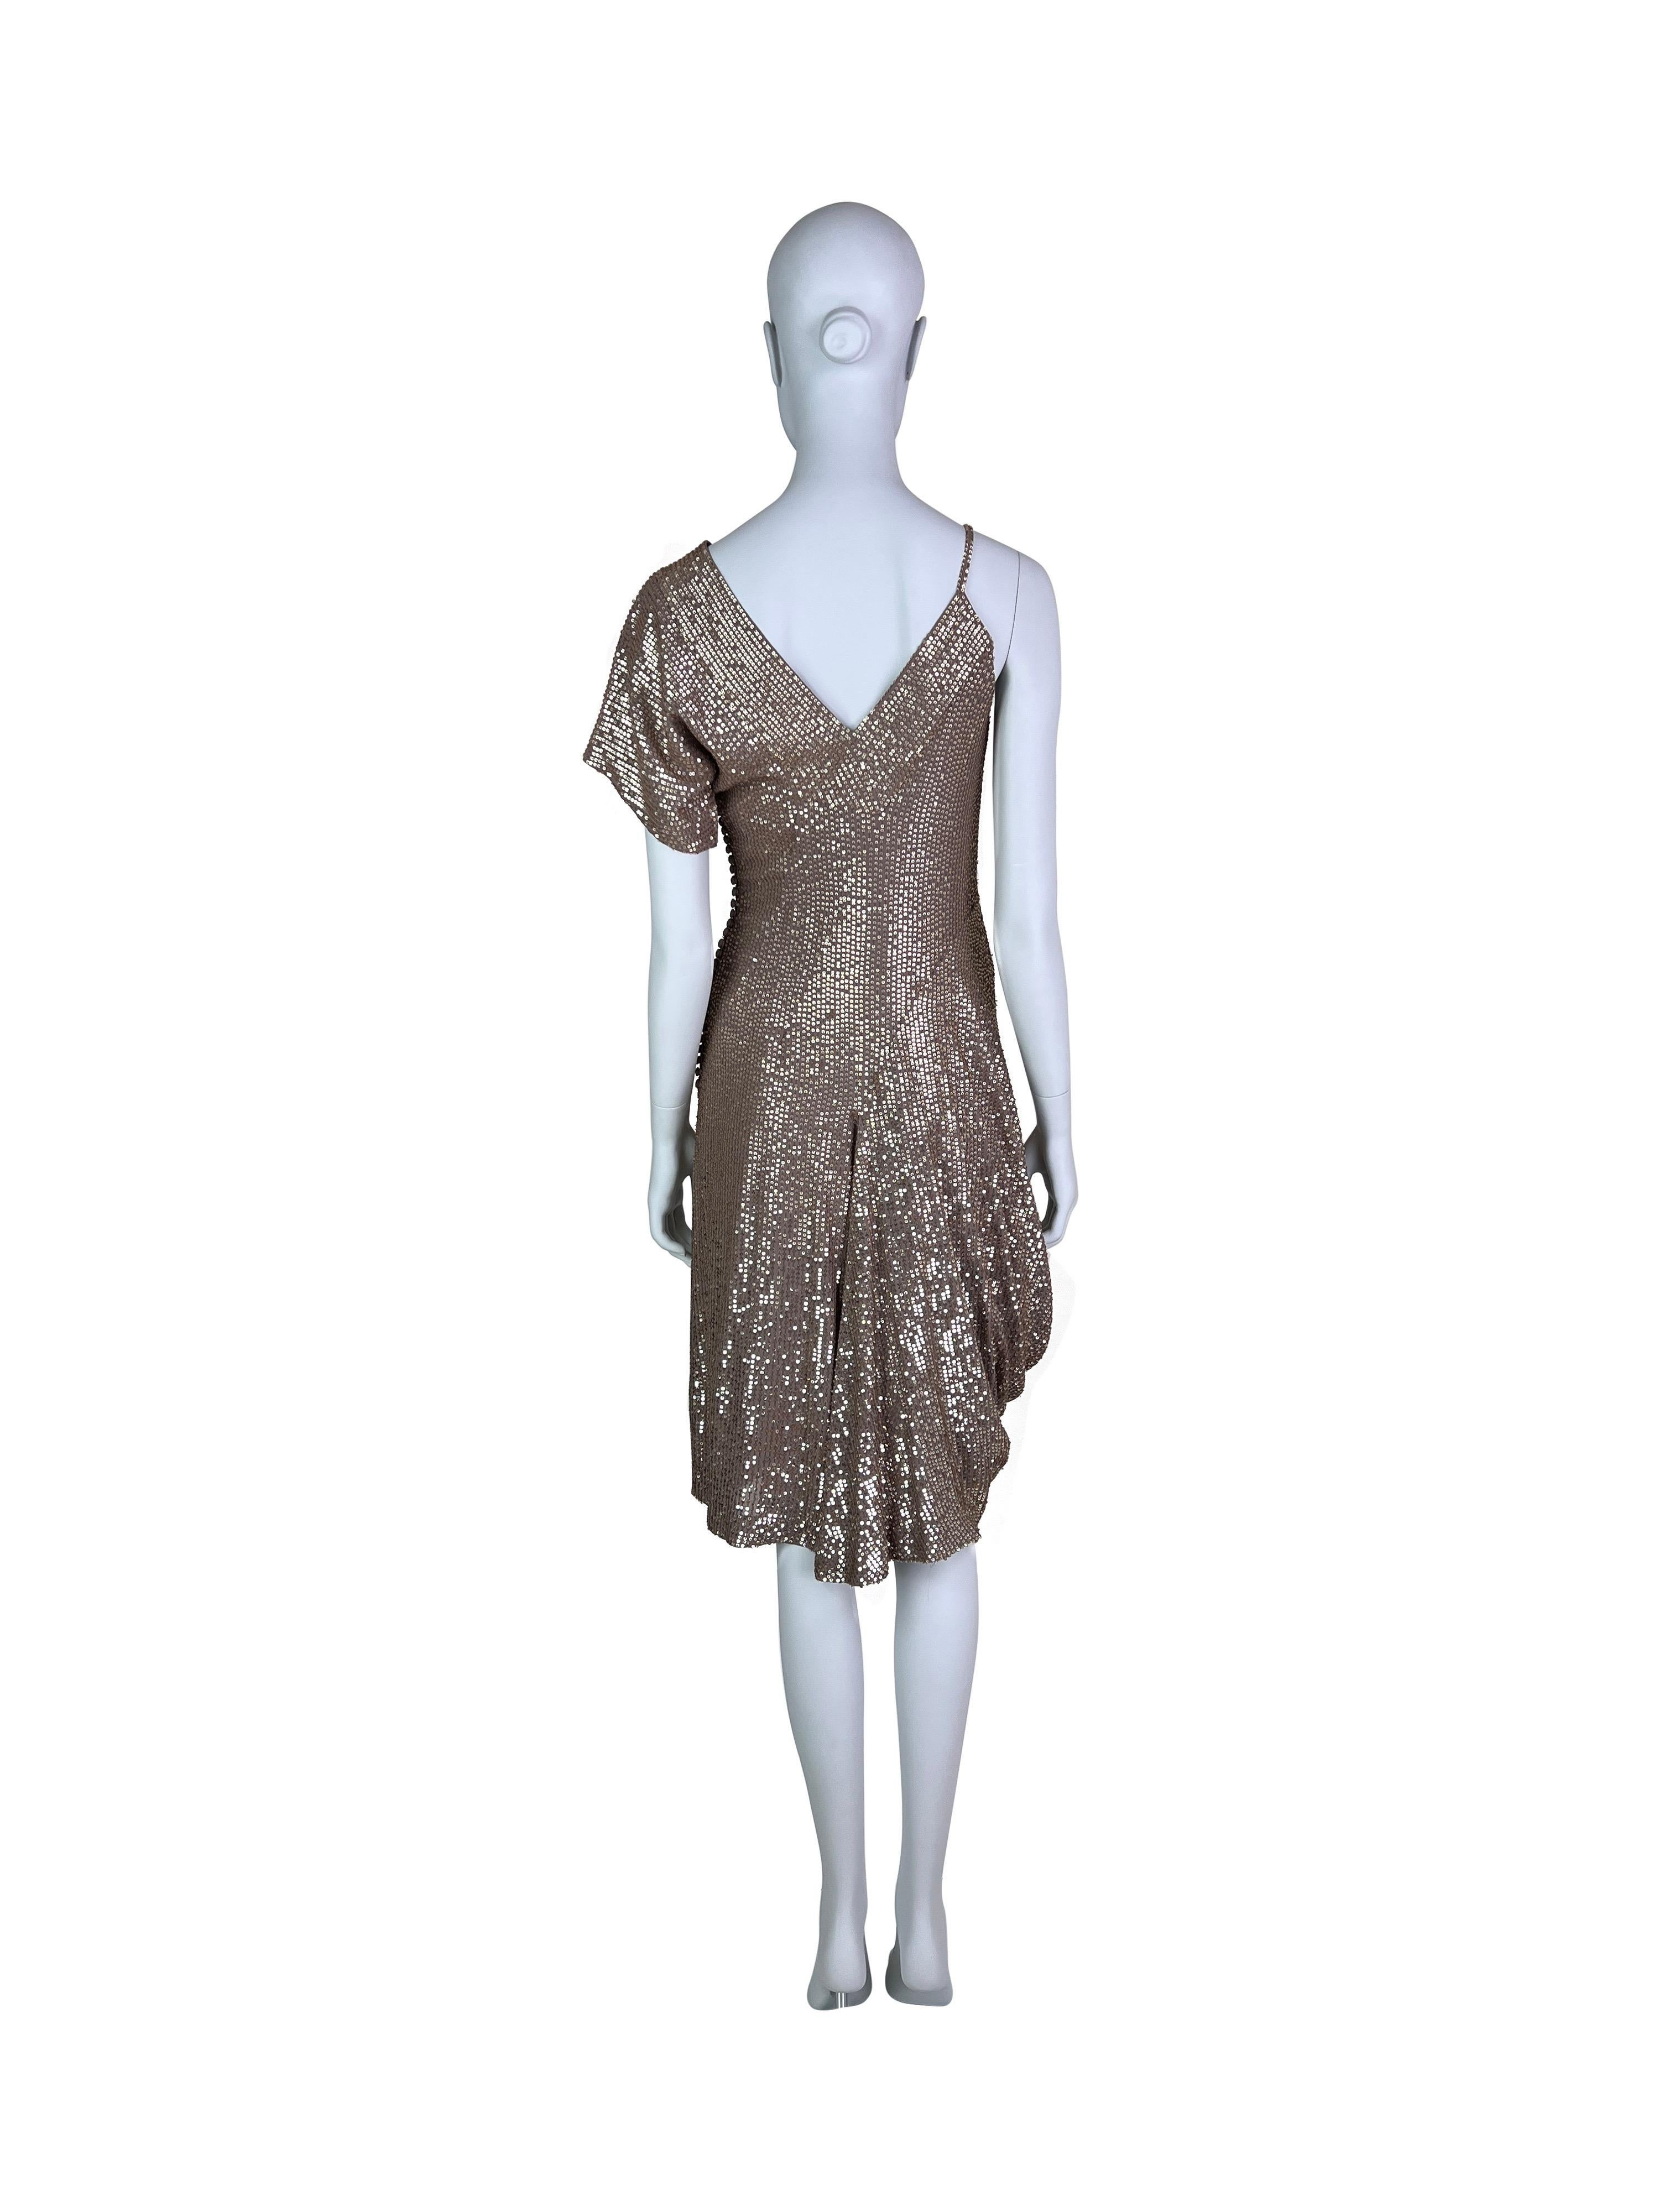 Dior by John Galliano Resort 2007 Sequin Dress For Sale 2